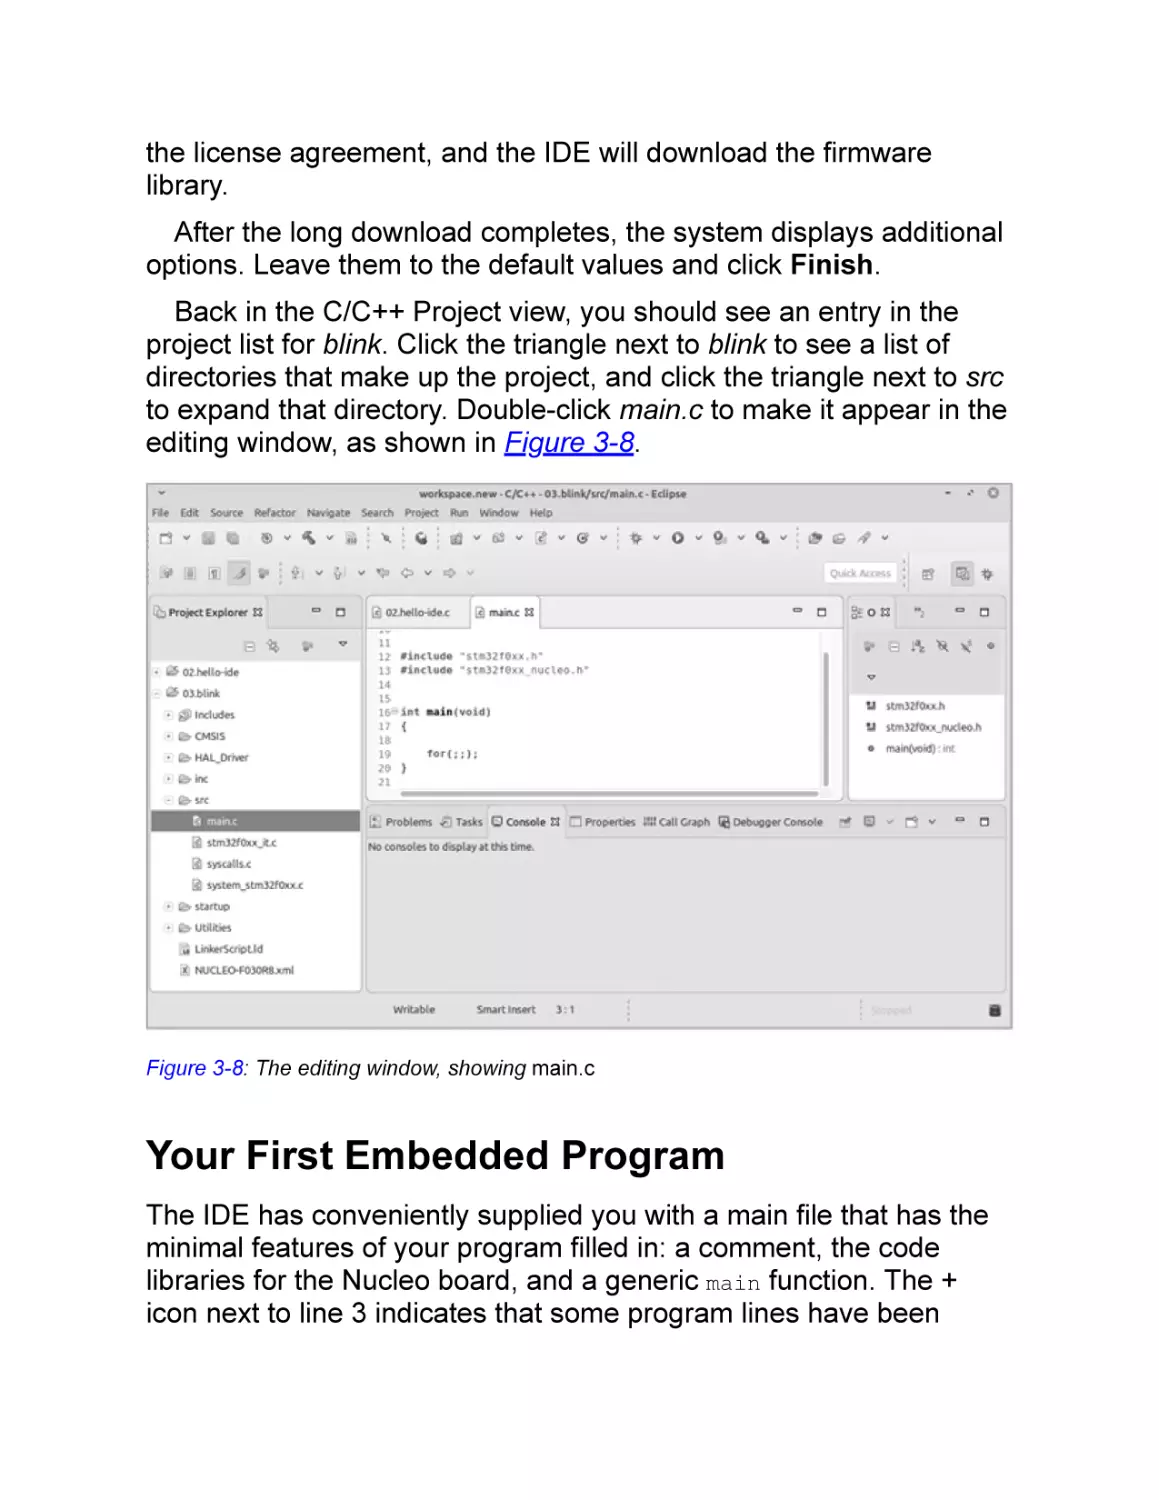 Your First Embedded Program